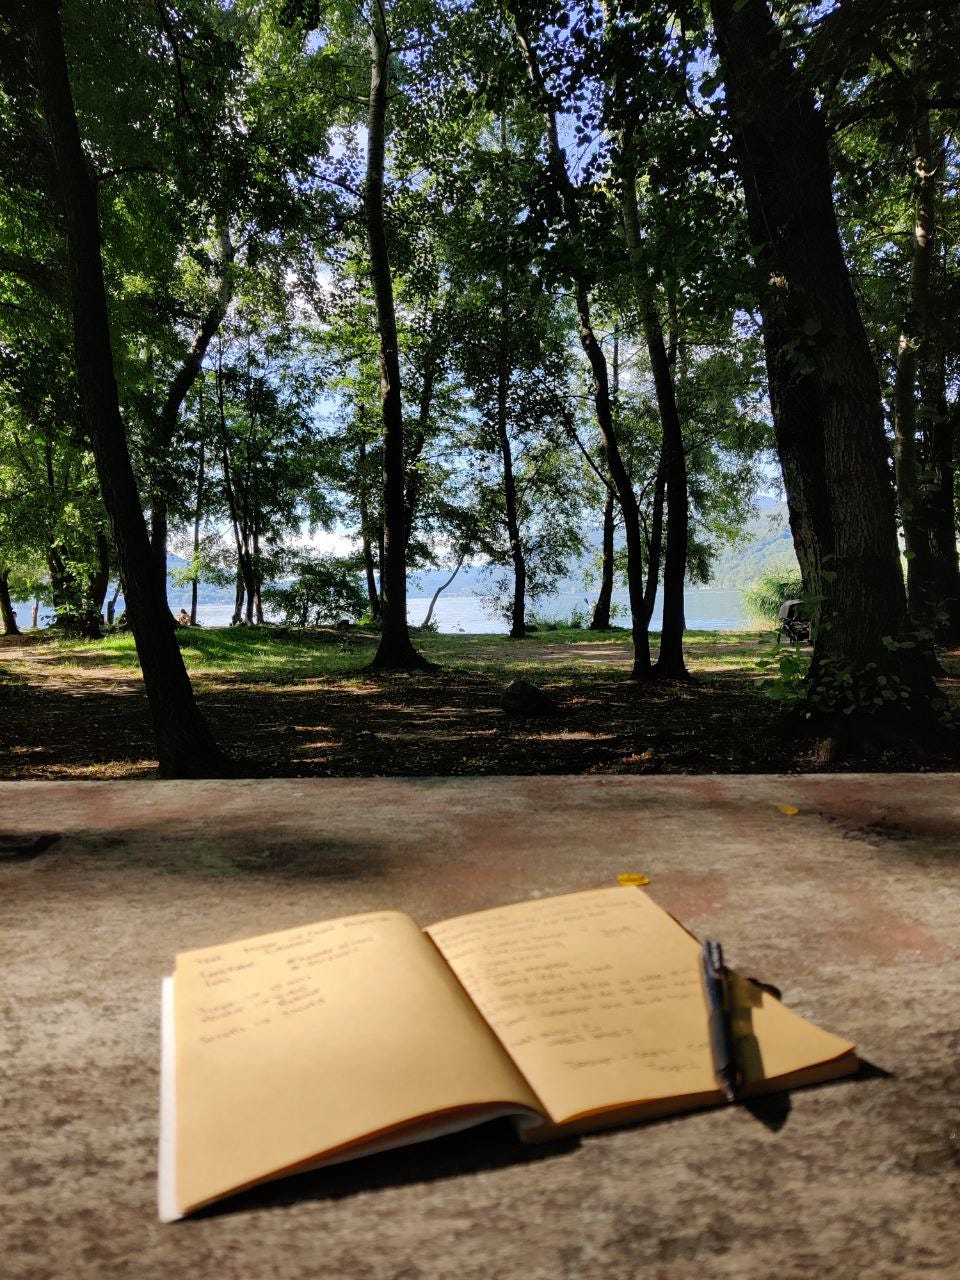 Nothing beats free thoughts brought to a pen and paper - in nature.